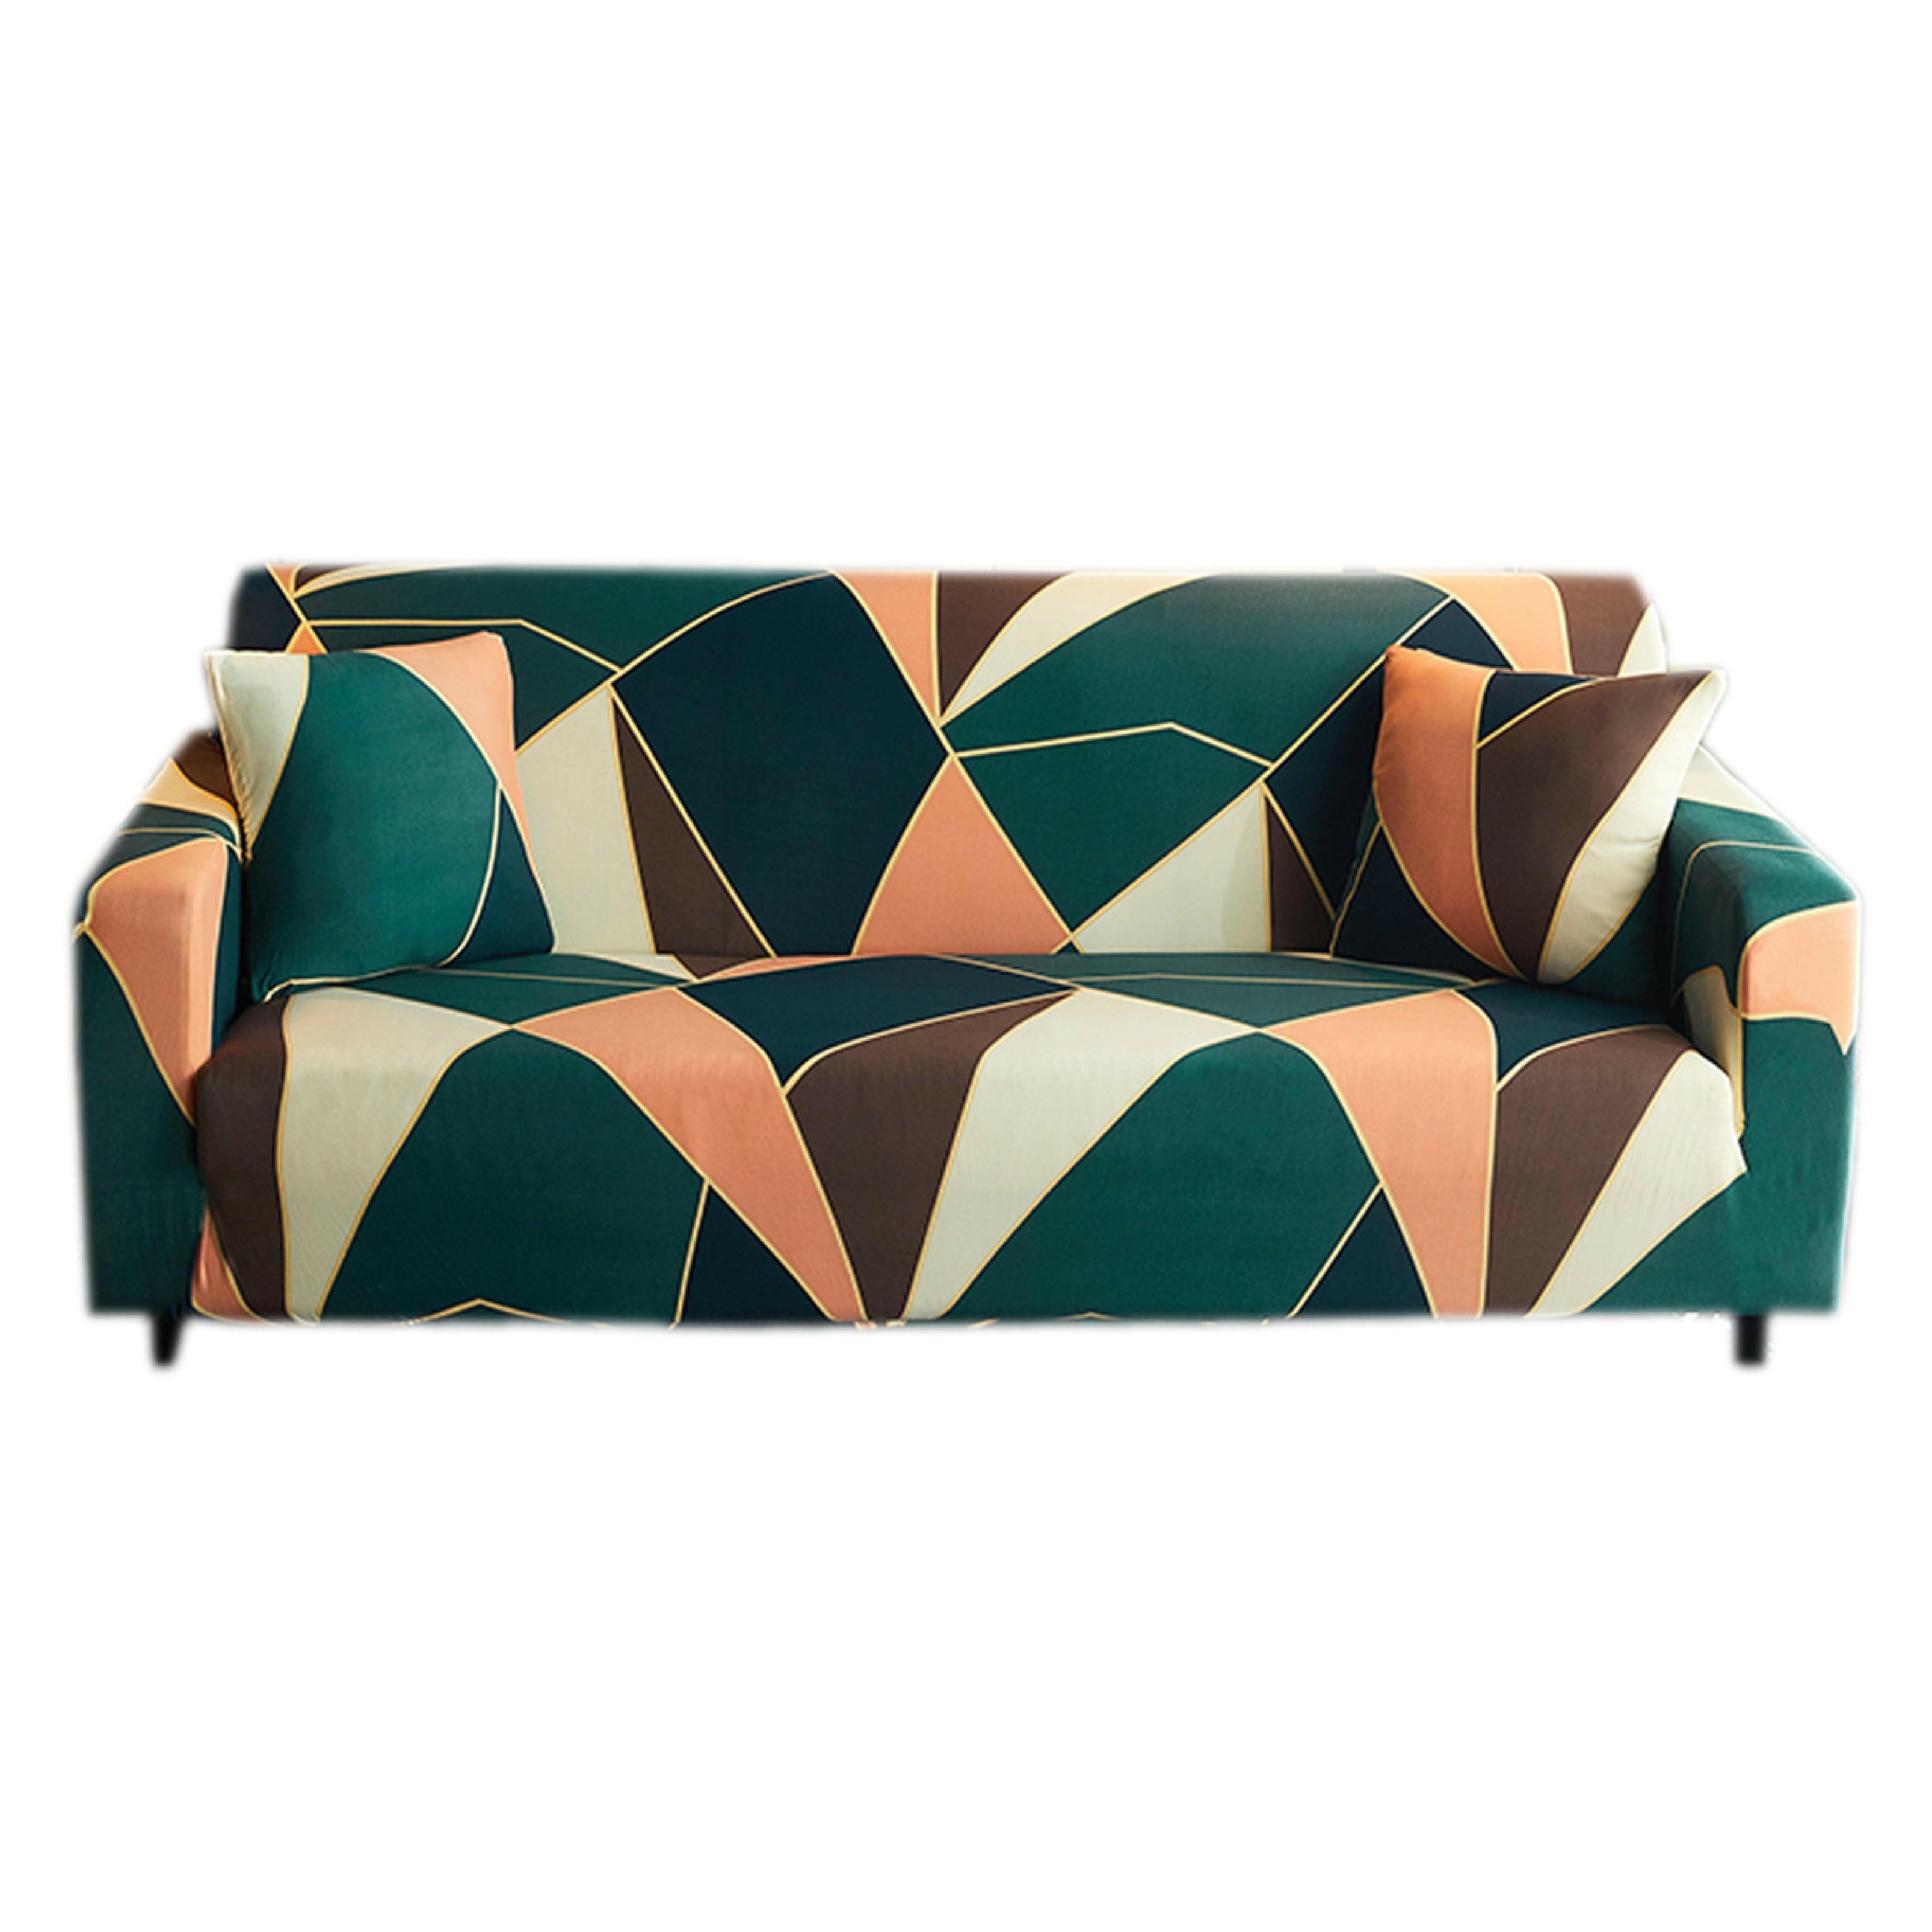 Hyper Cover Stretch Sofa Cover with Patterns Nostalgic Cube | Sofa Covers | Brilliant Home Living